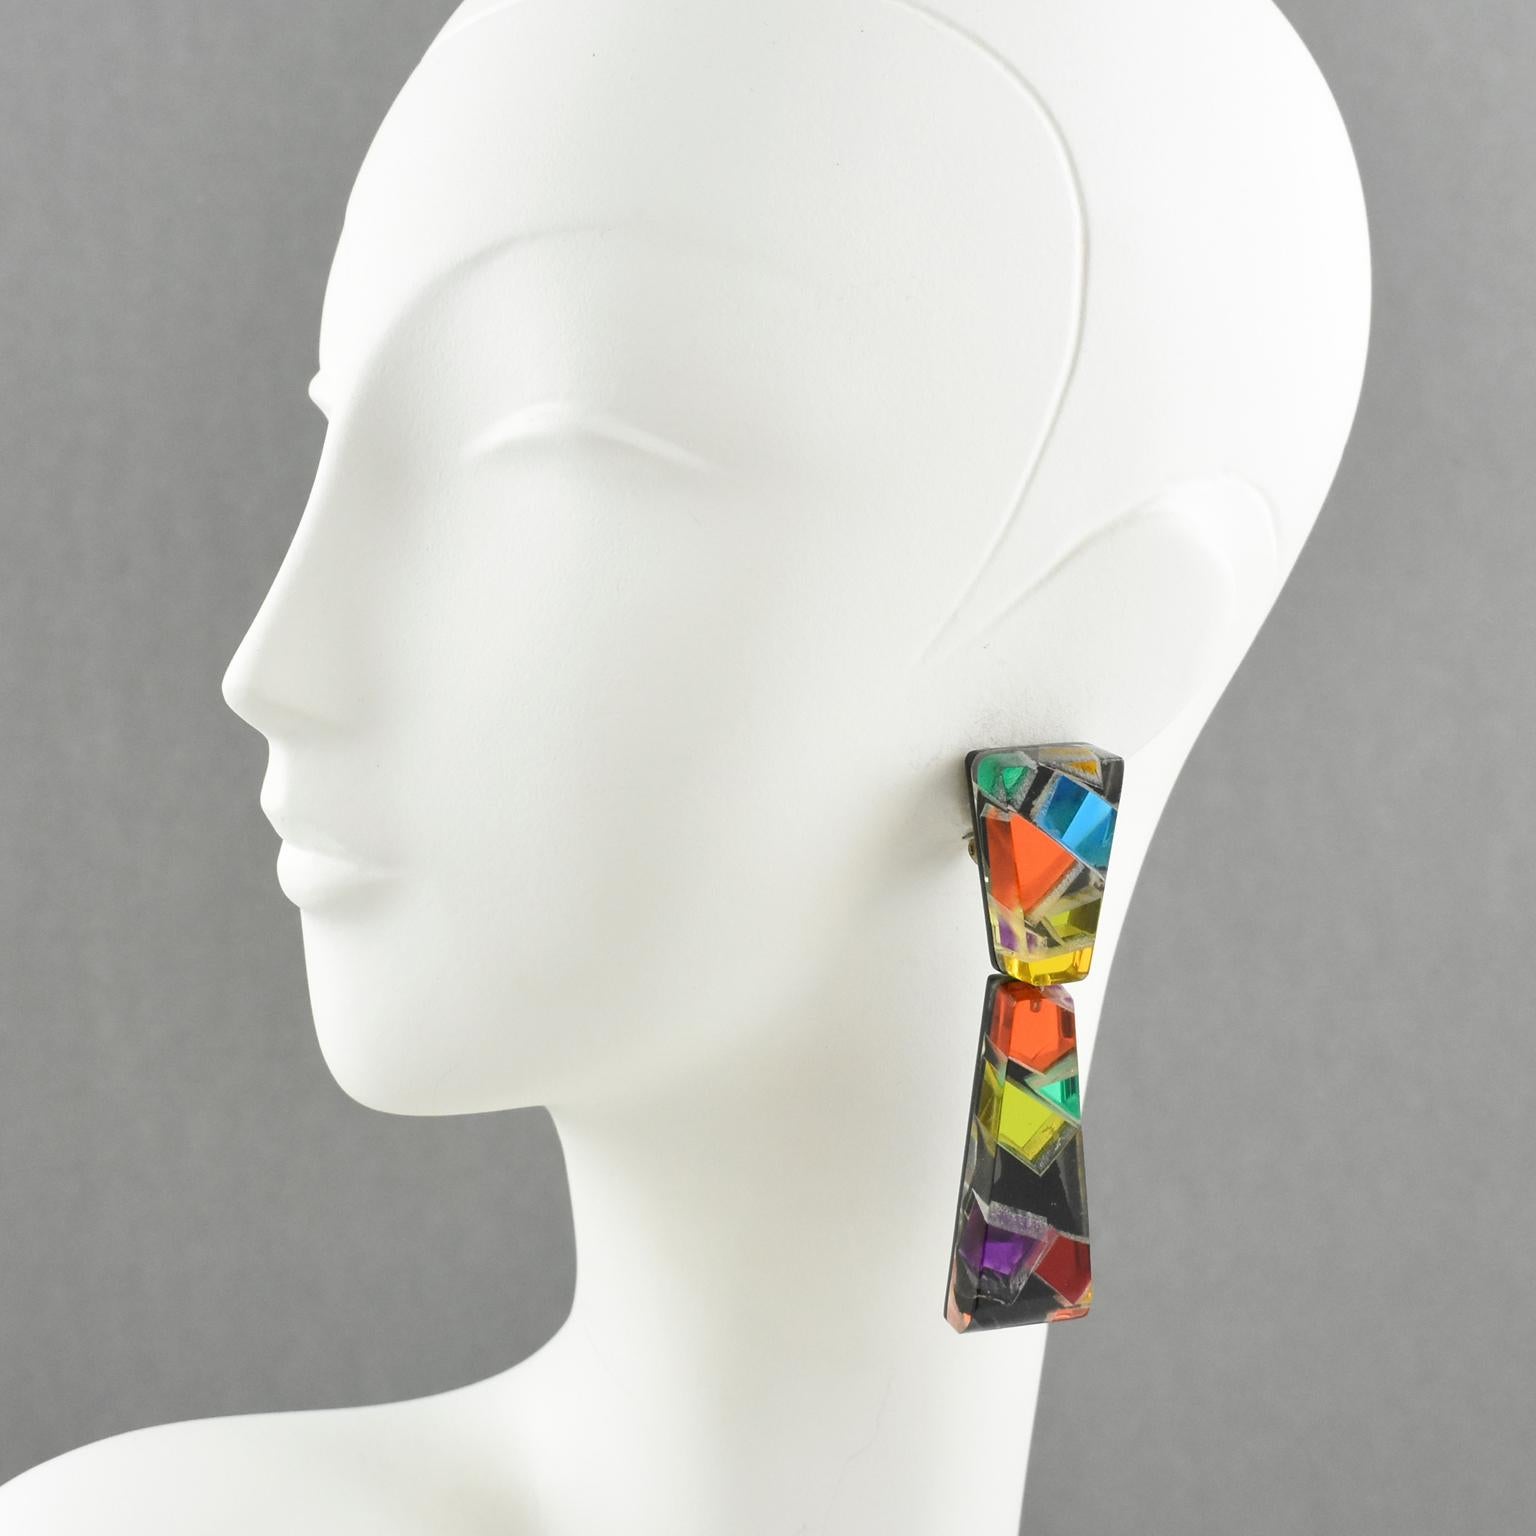 Colorful oversized Lucite chandelier clip on earrings designed by Harriet Bauknight for Kaso. Large dangling shape with geometric design featuring dimensional multilayer black lucite with colorful harlequin mirrored effect inclusions. Assorted